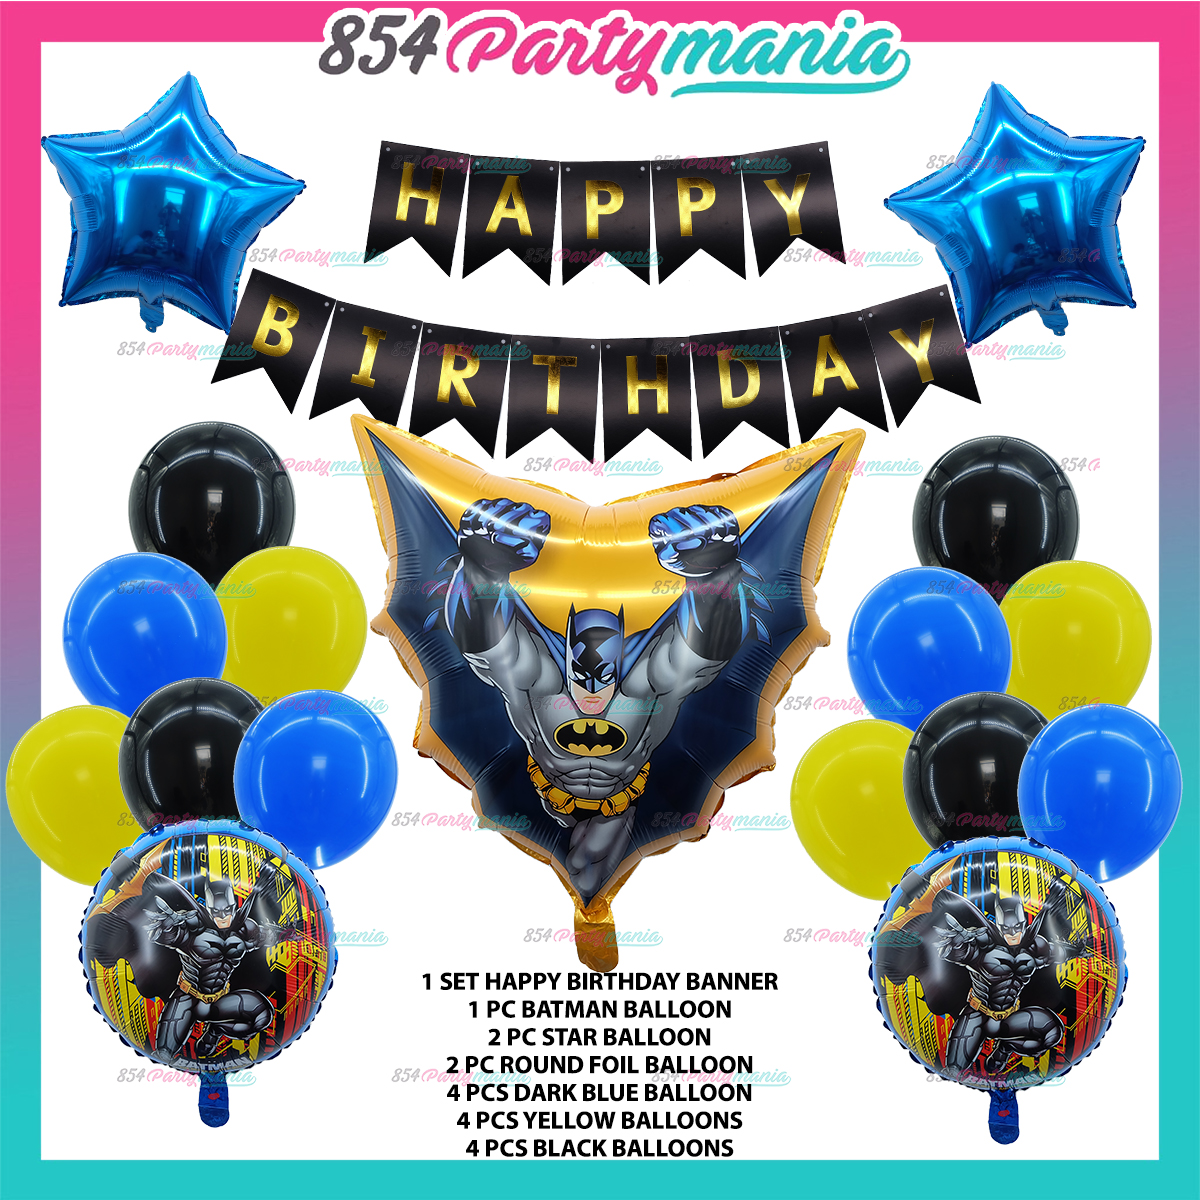 Batman Happy Birthday Balloon party Set and Banner For Birthday Decoration  For Boys Bundle sold by 854partymania Birthday Party Needs Decoration |  Lazada PH